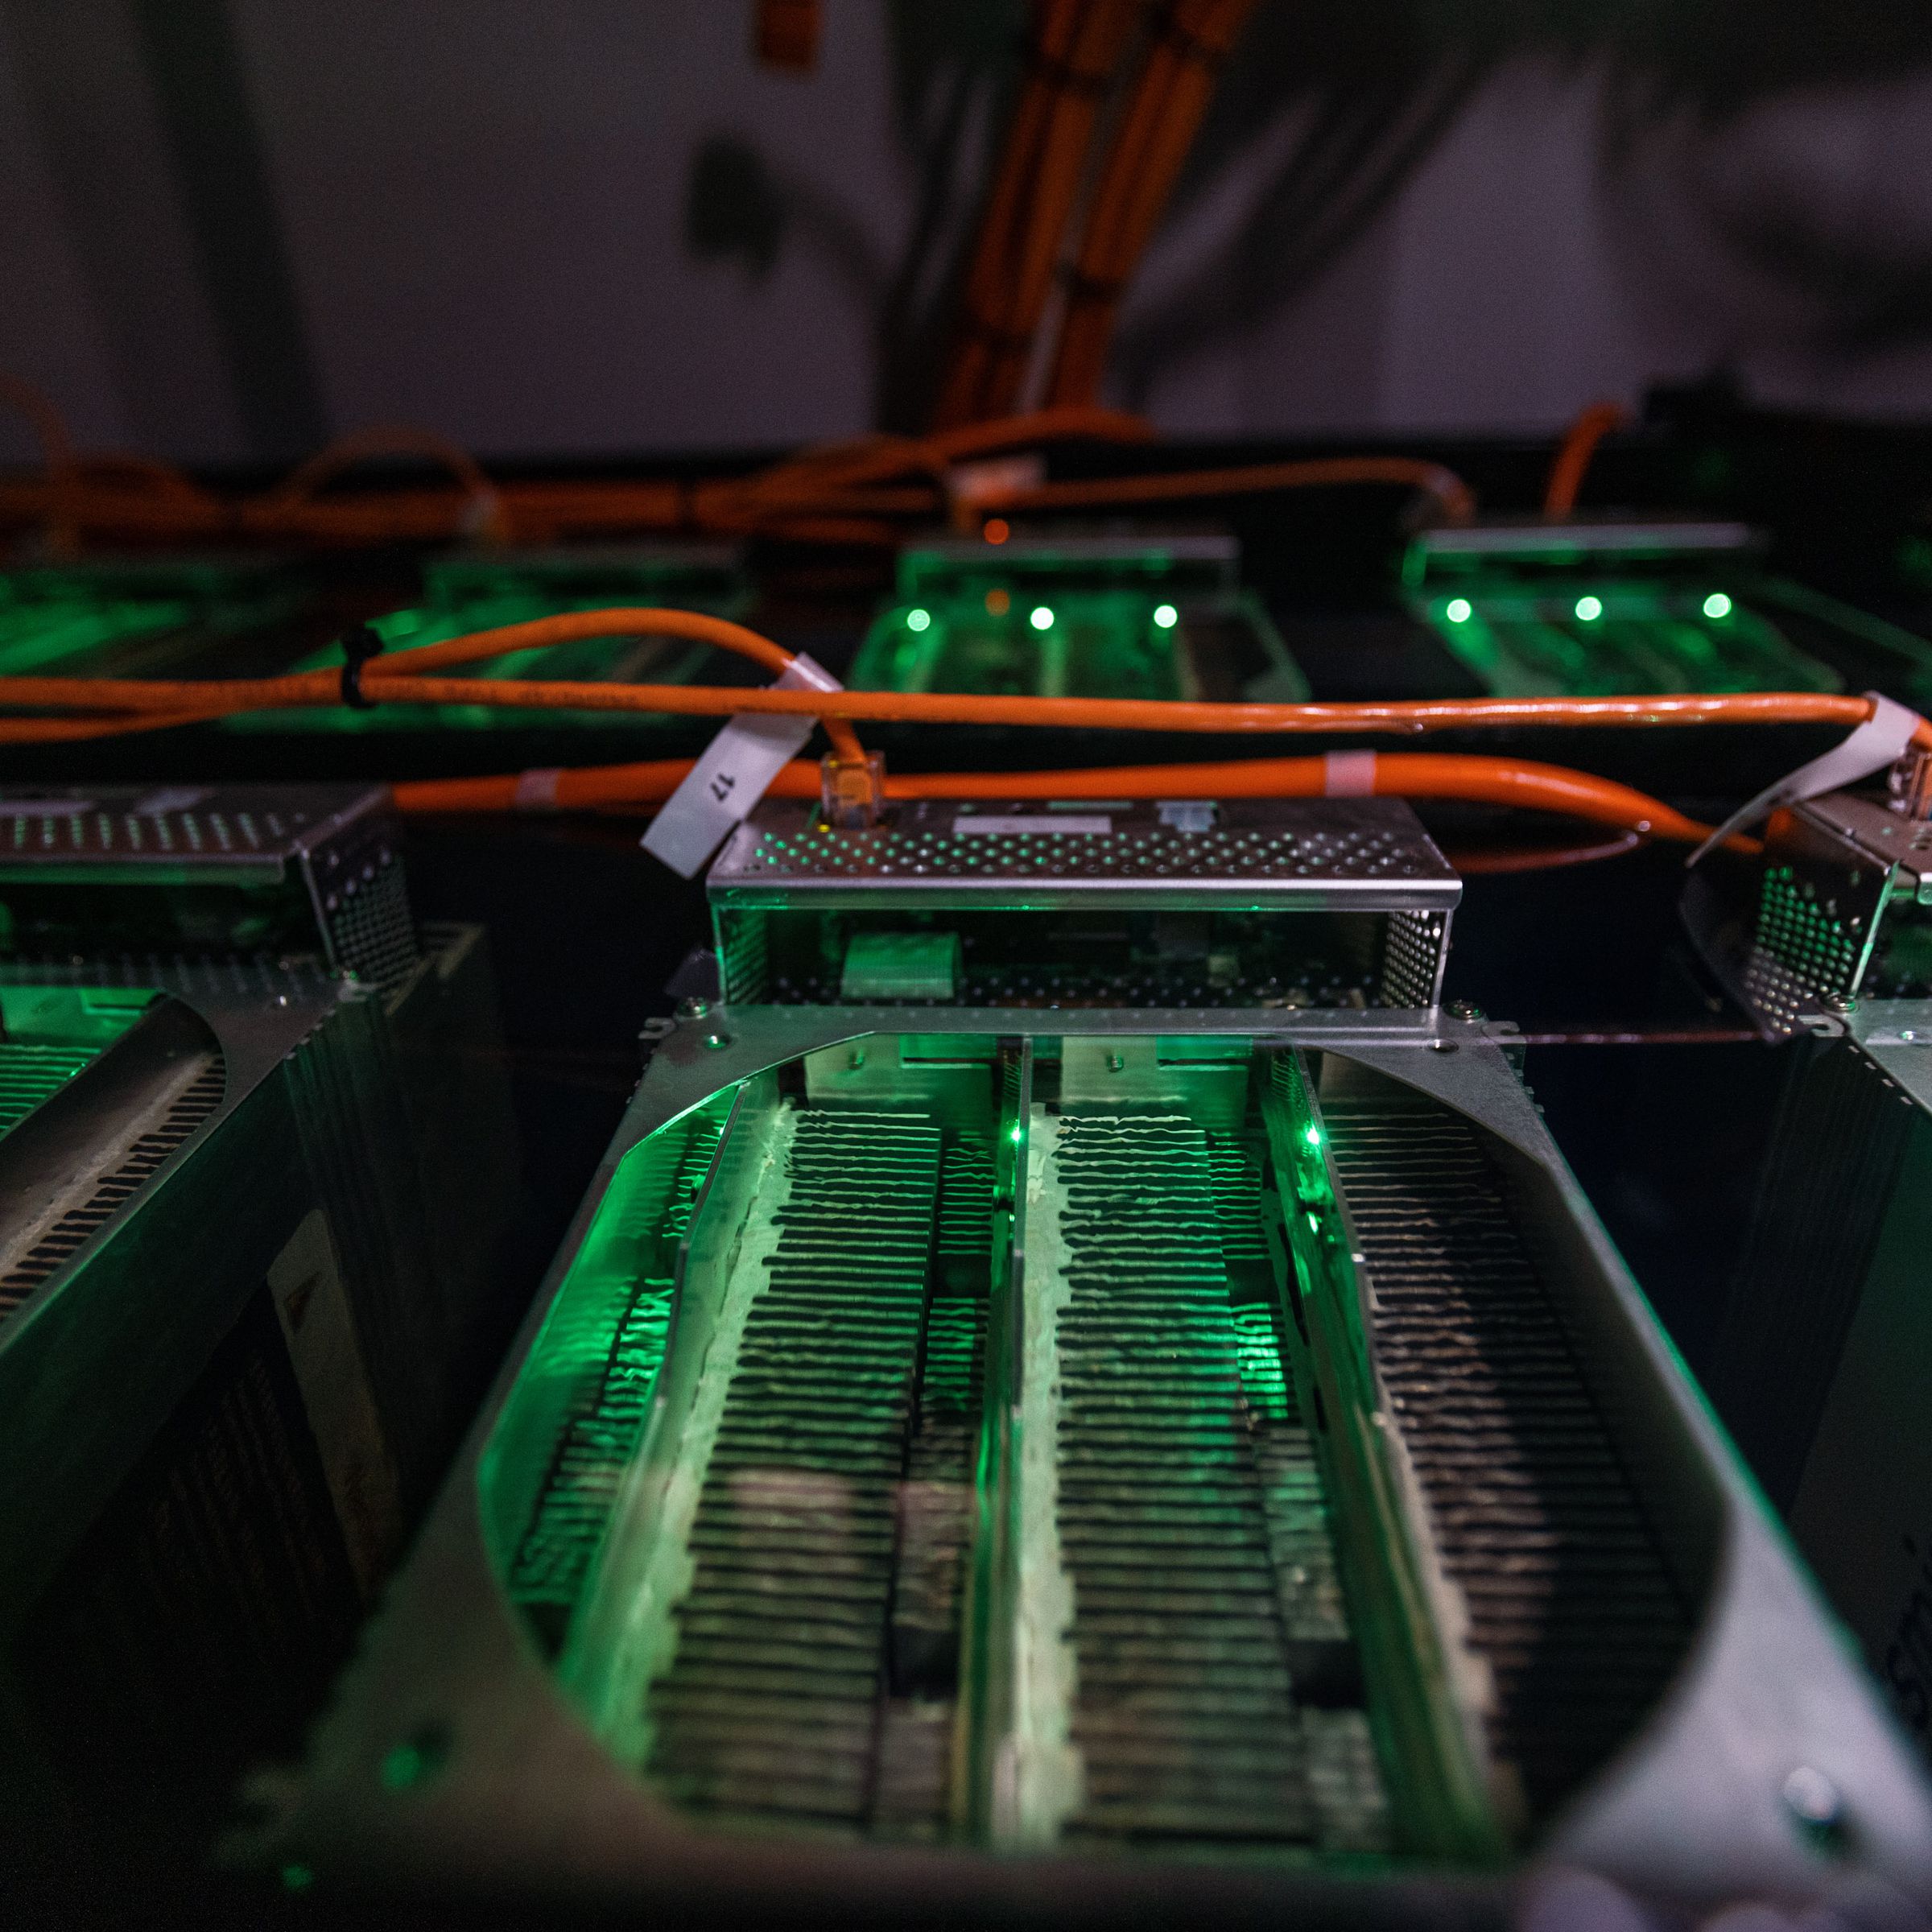 Texas Bitcoin Miners Seek Cheap Power, Land and a Place to Stay